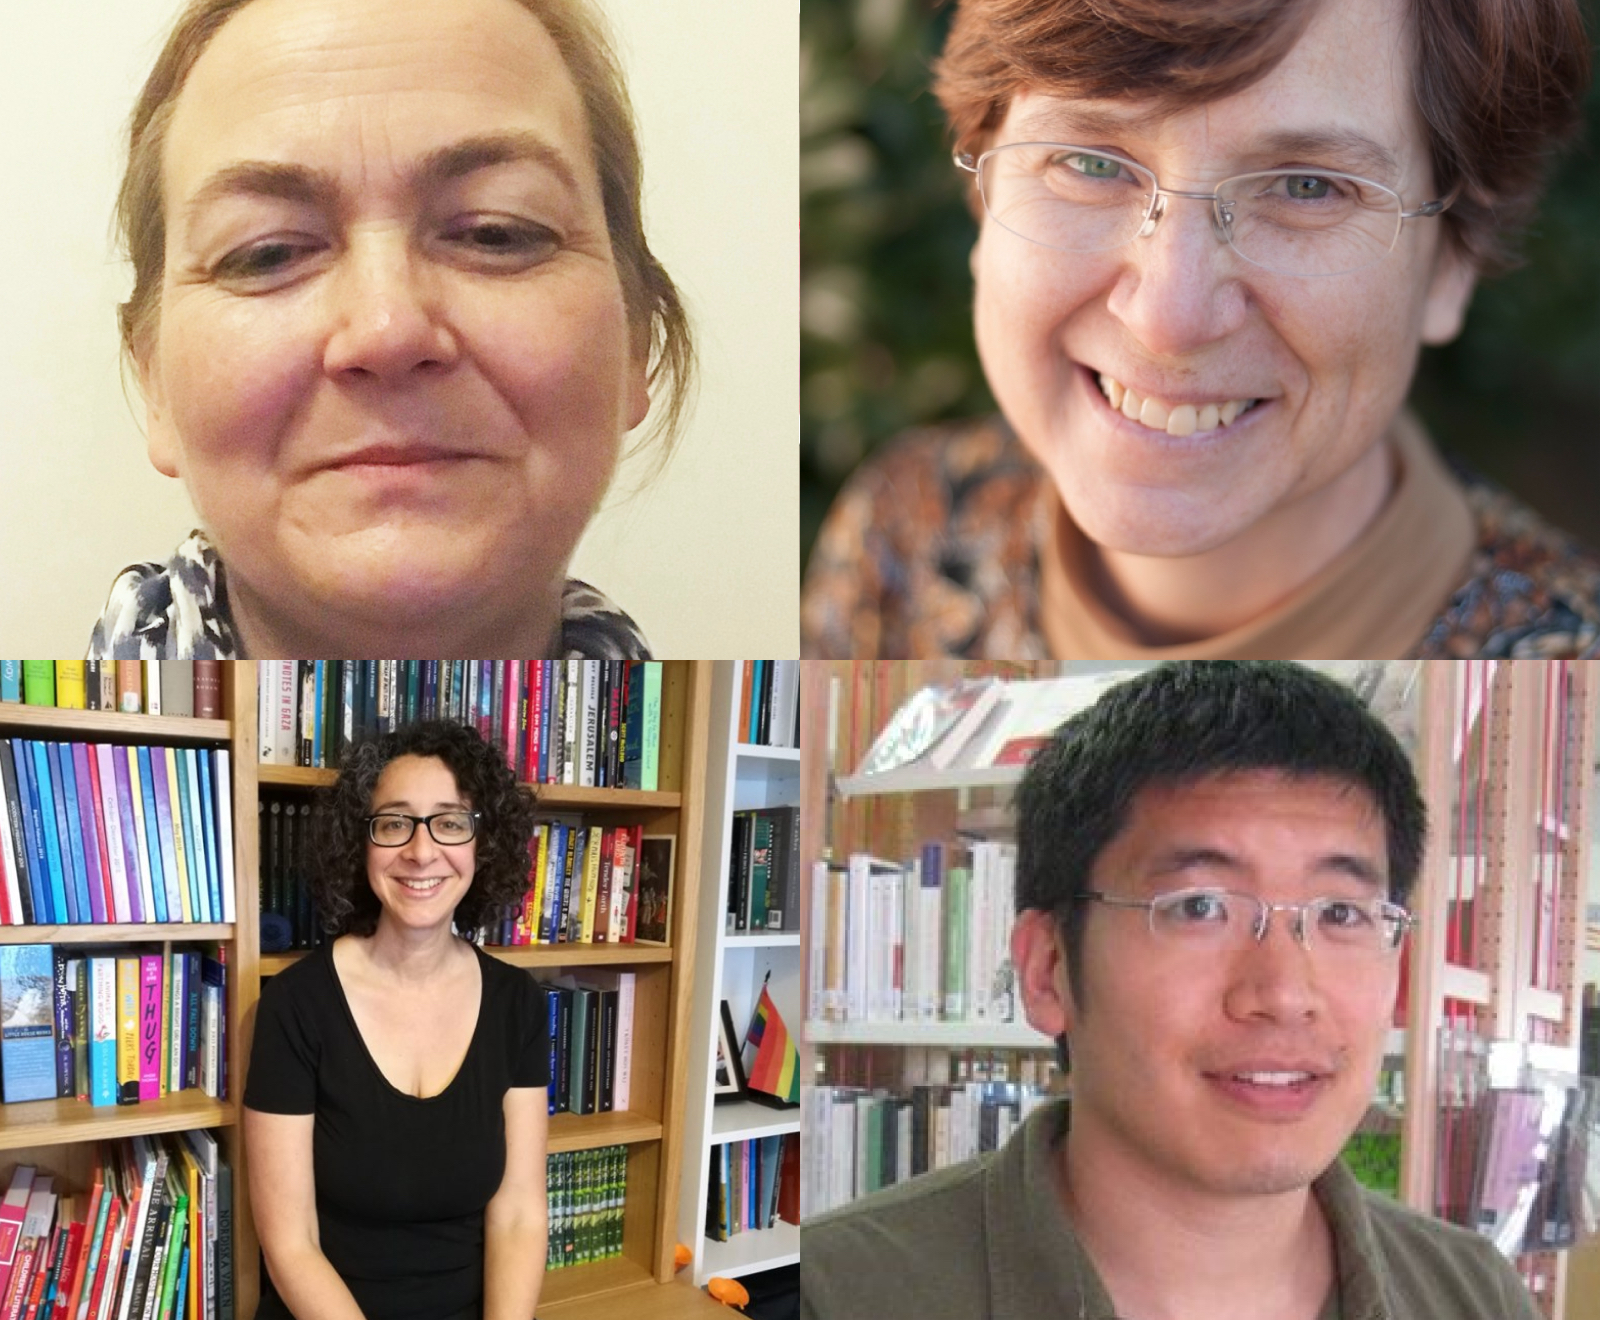 Hero image for the Translators category featuring four photos of translators in a grid style. On the top left is Helen Wang, on the top right is Cathy Hirano, on the bottom left is BJ Woodstein, and on the bottom right is Edward Gauvin.